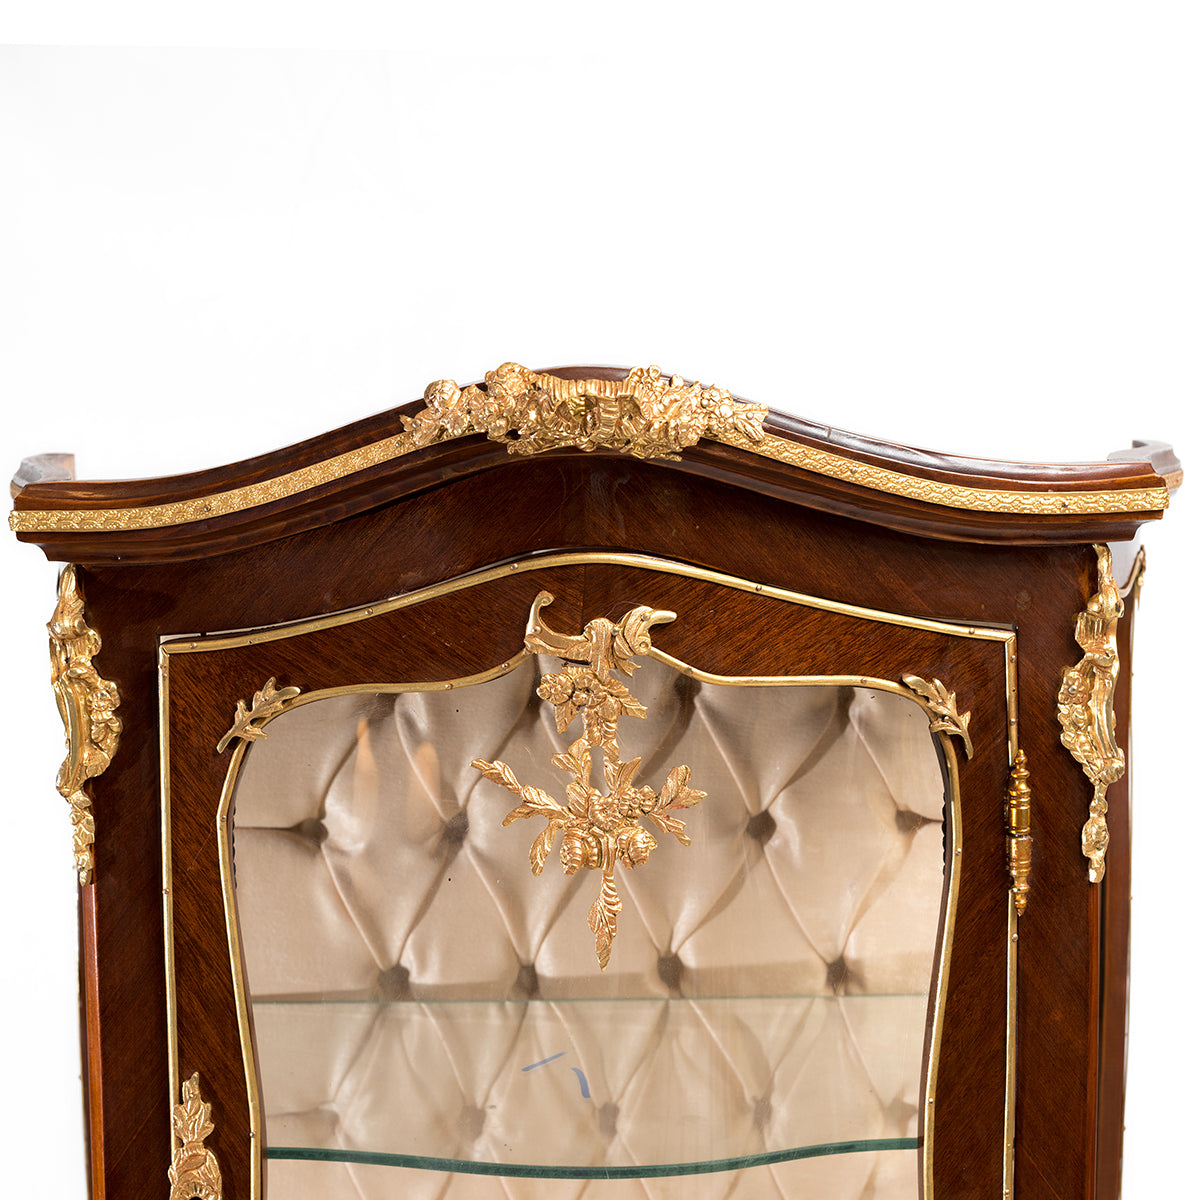 French style ormolu mounted glass vitrine cabinet and Vernis Martin